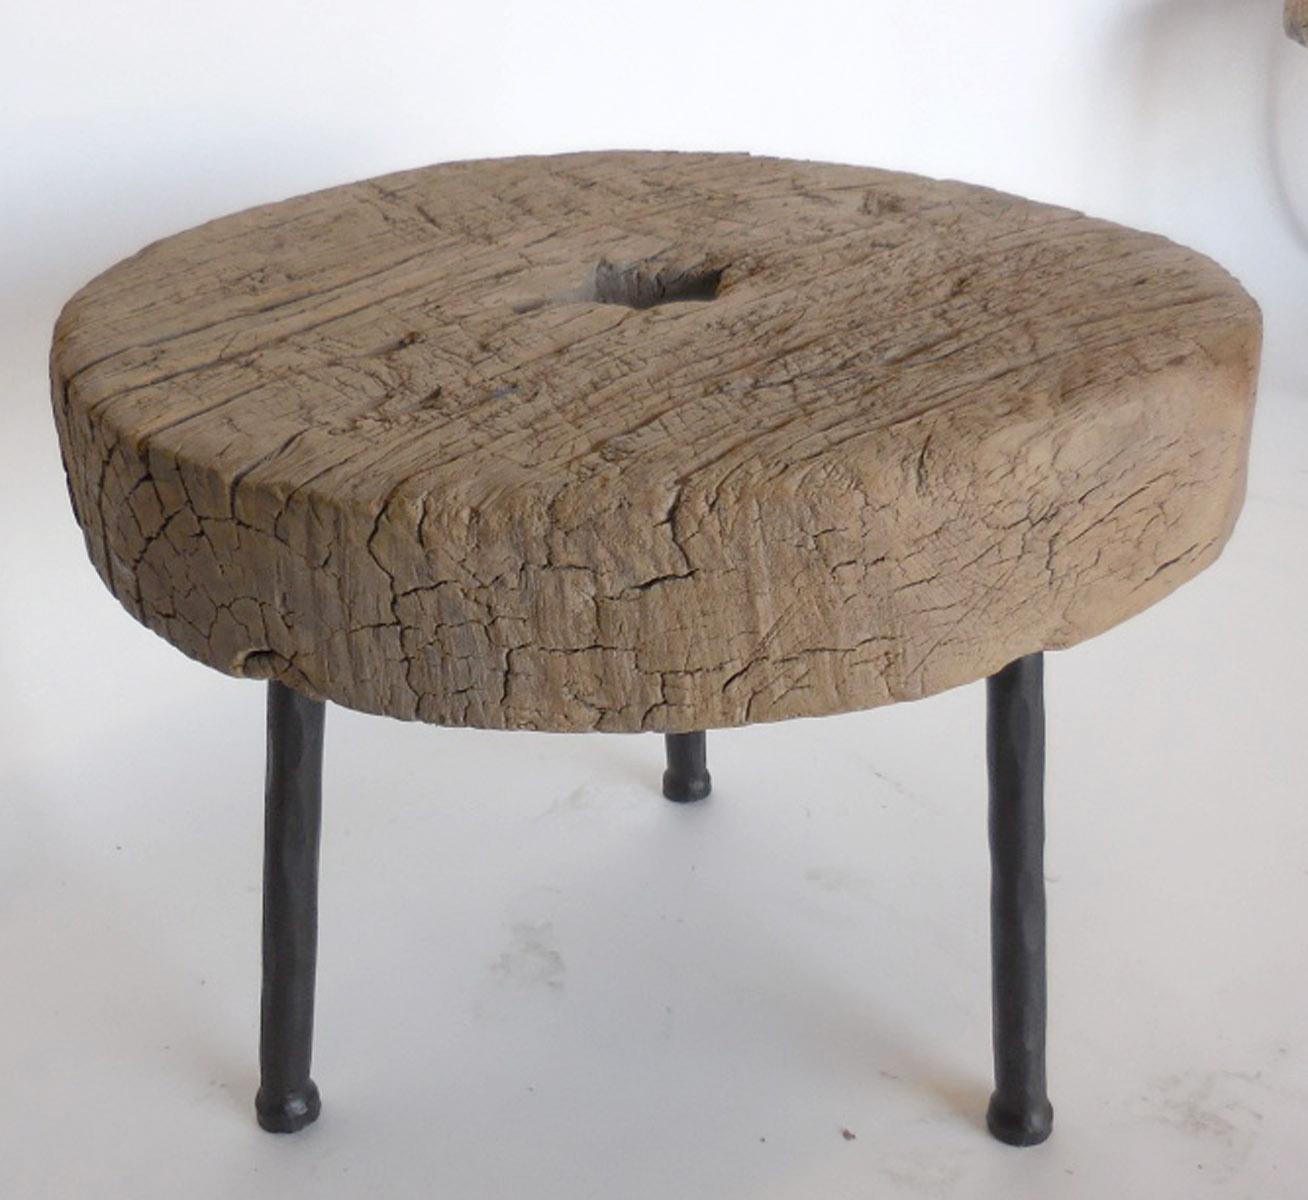 Rustic 19th Century Wooden Wheel Table